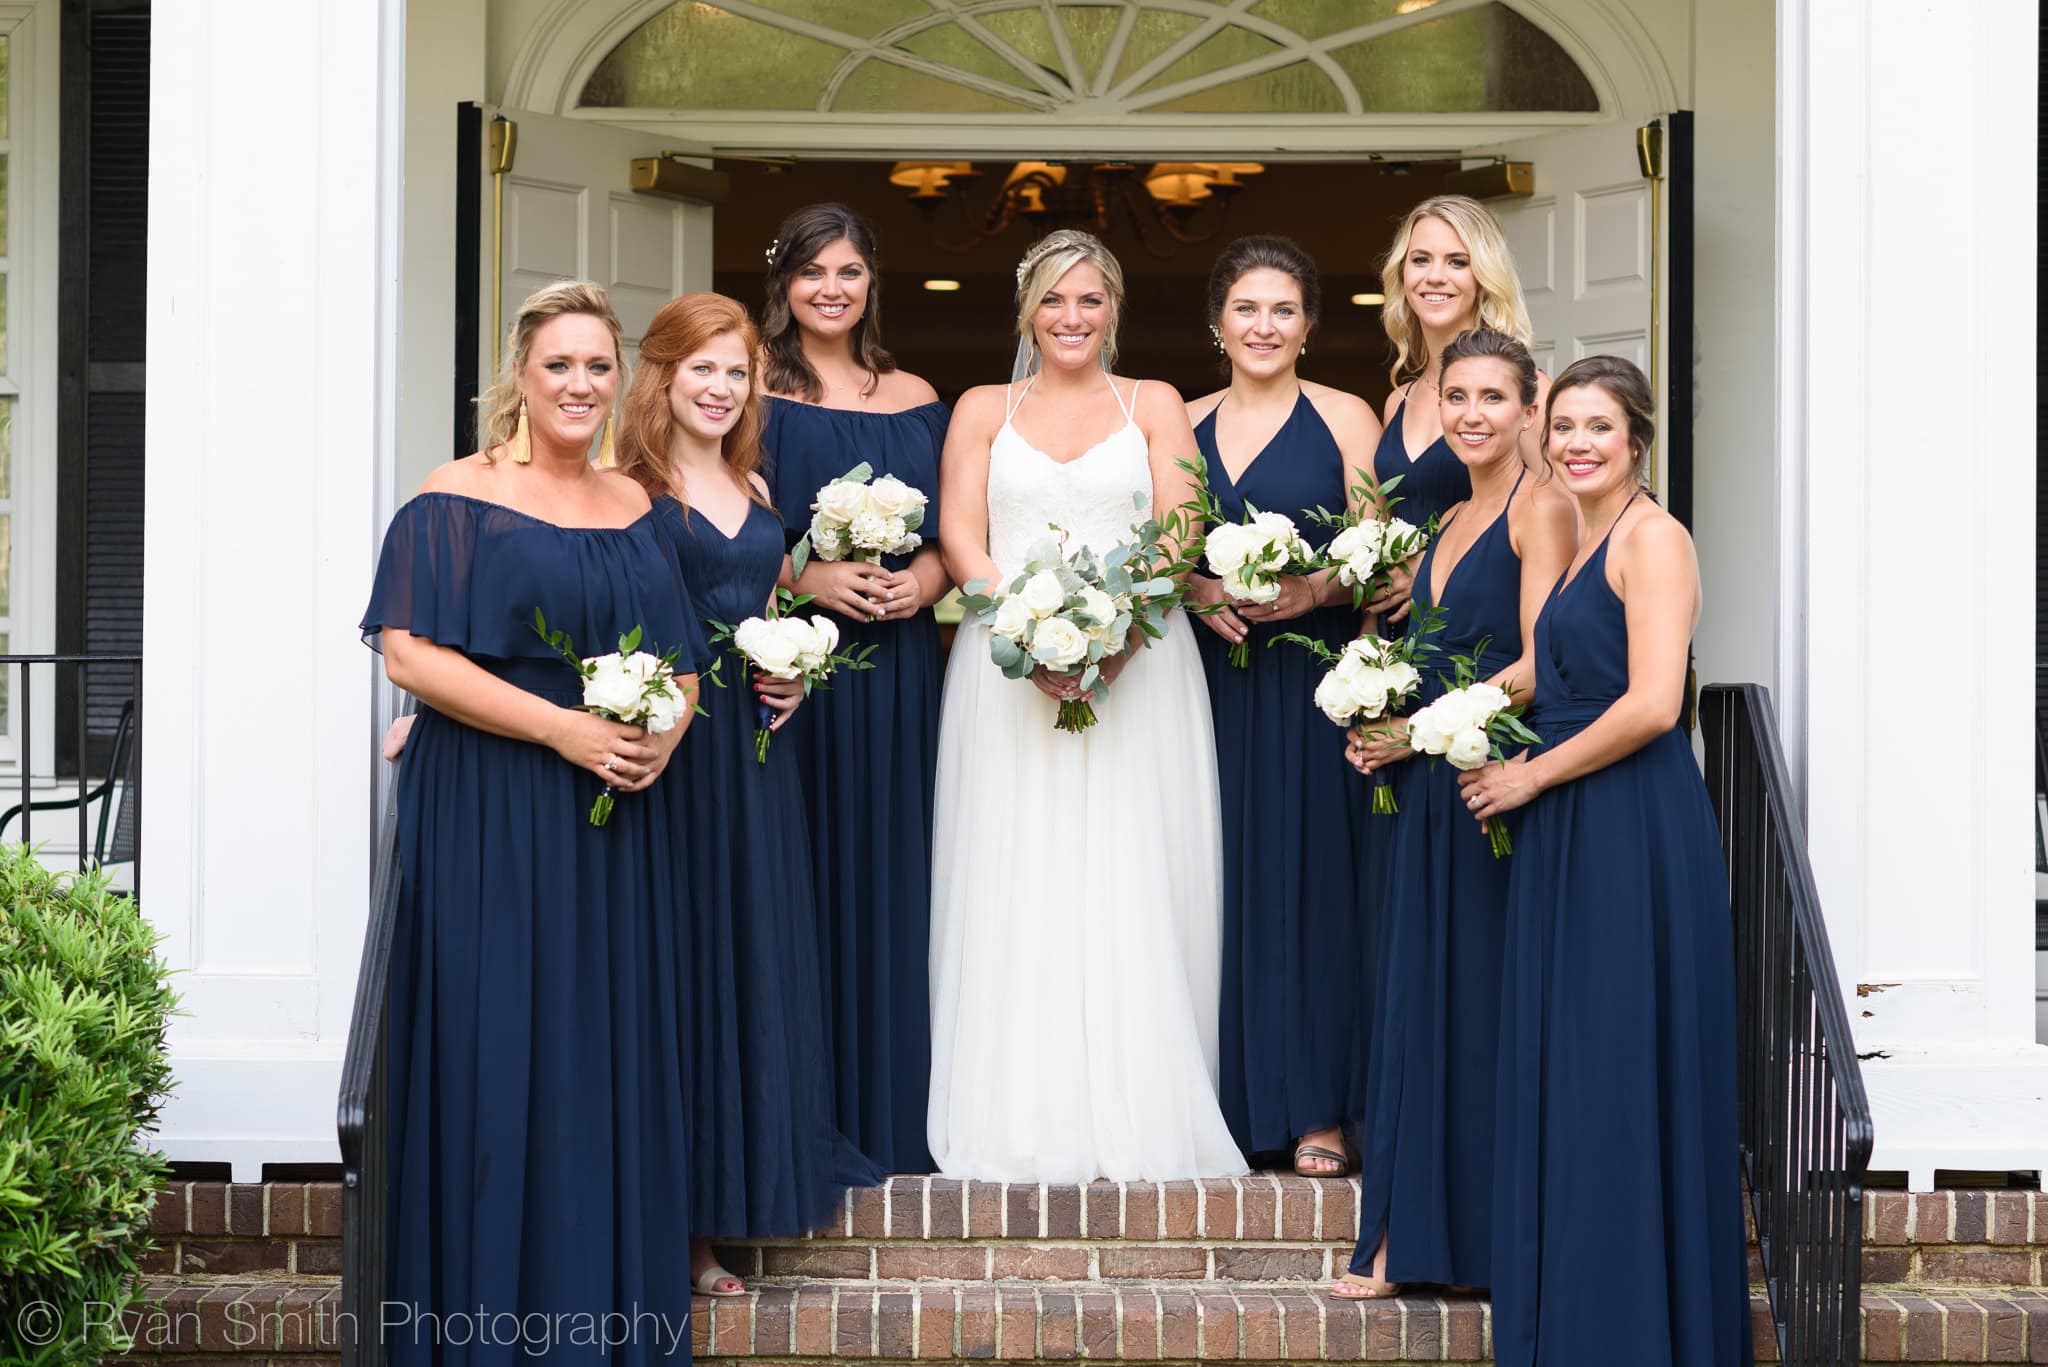 Bridesmaids standing together before the ceremony - Pawleys Plantation